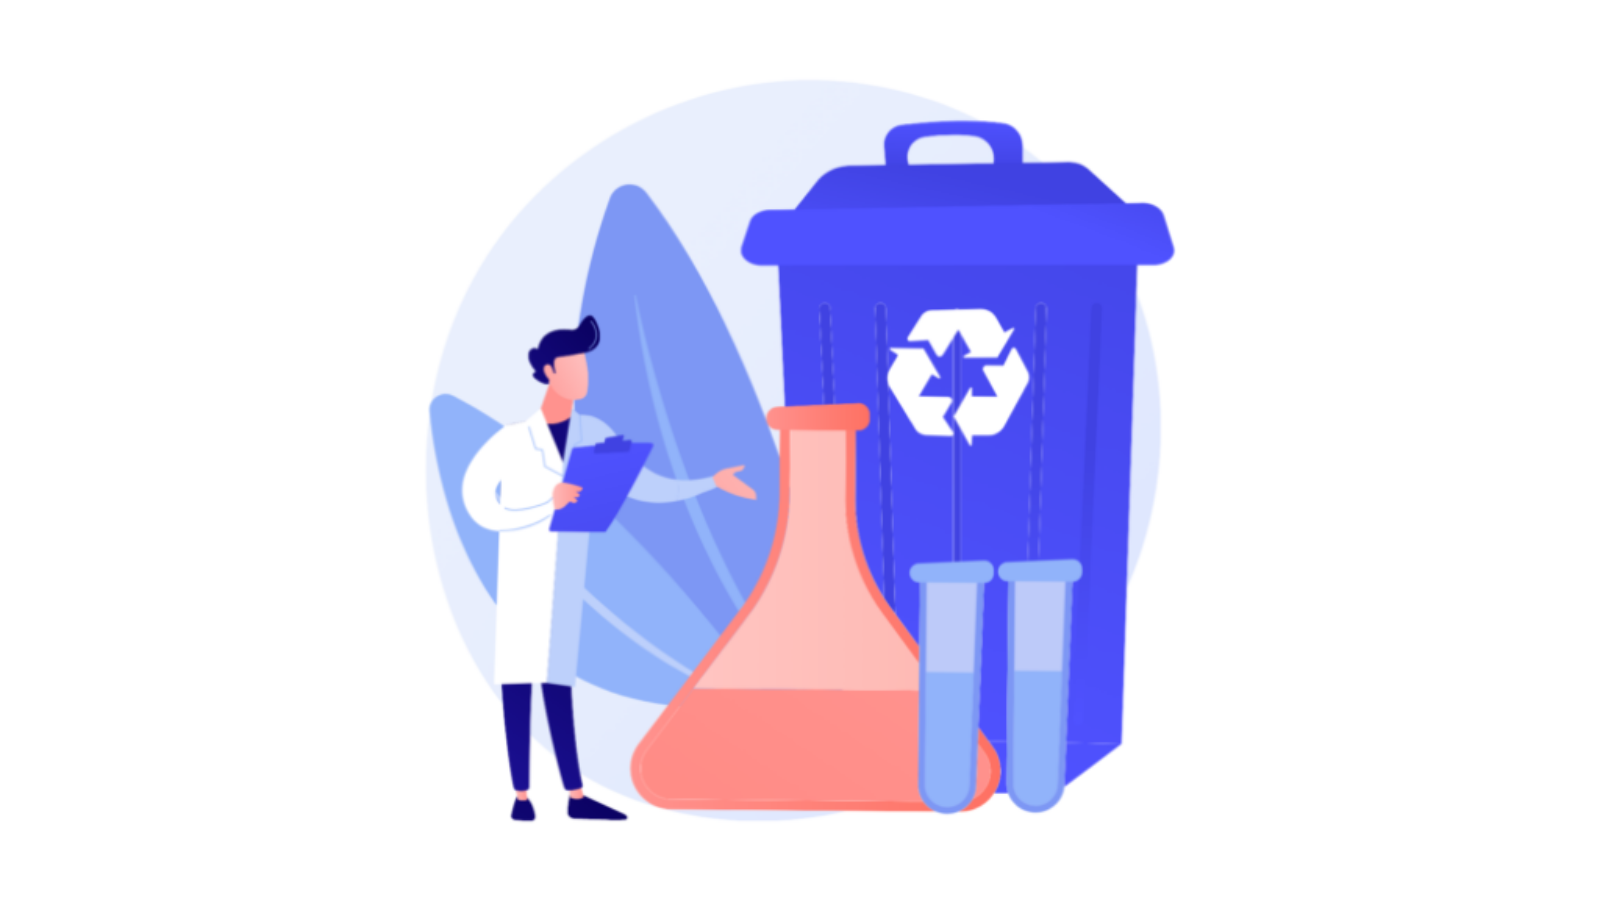 Illustration of scientist with beakers, test tubes and a recycling container